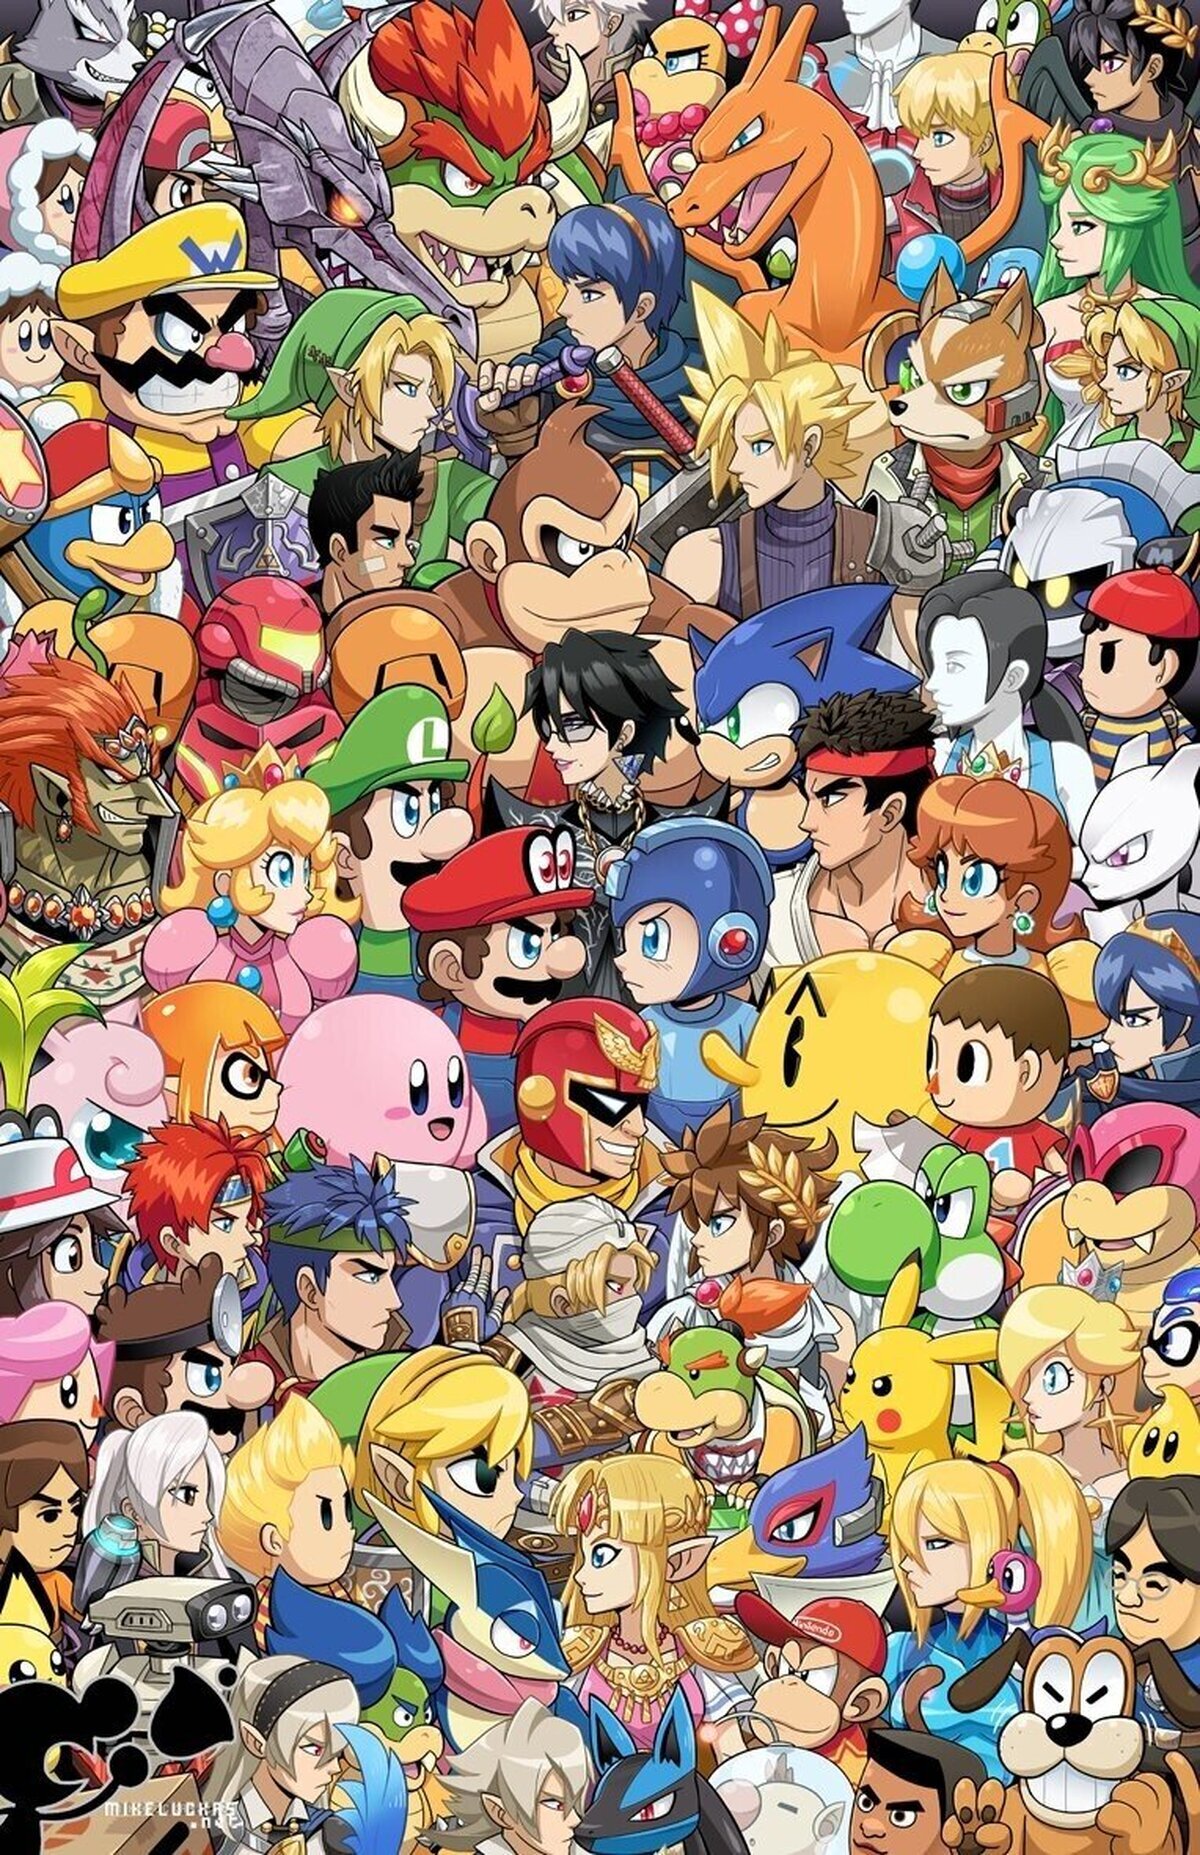 Nintendo vs characters from another's companies